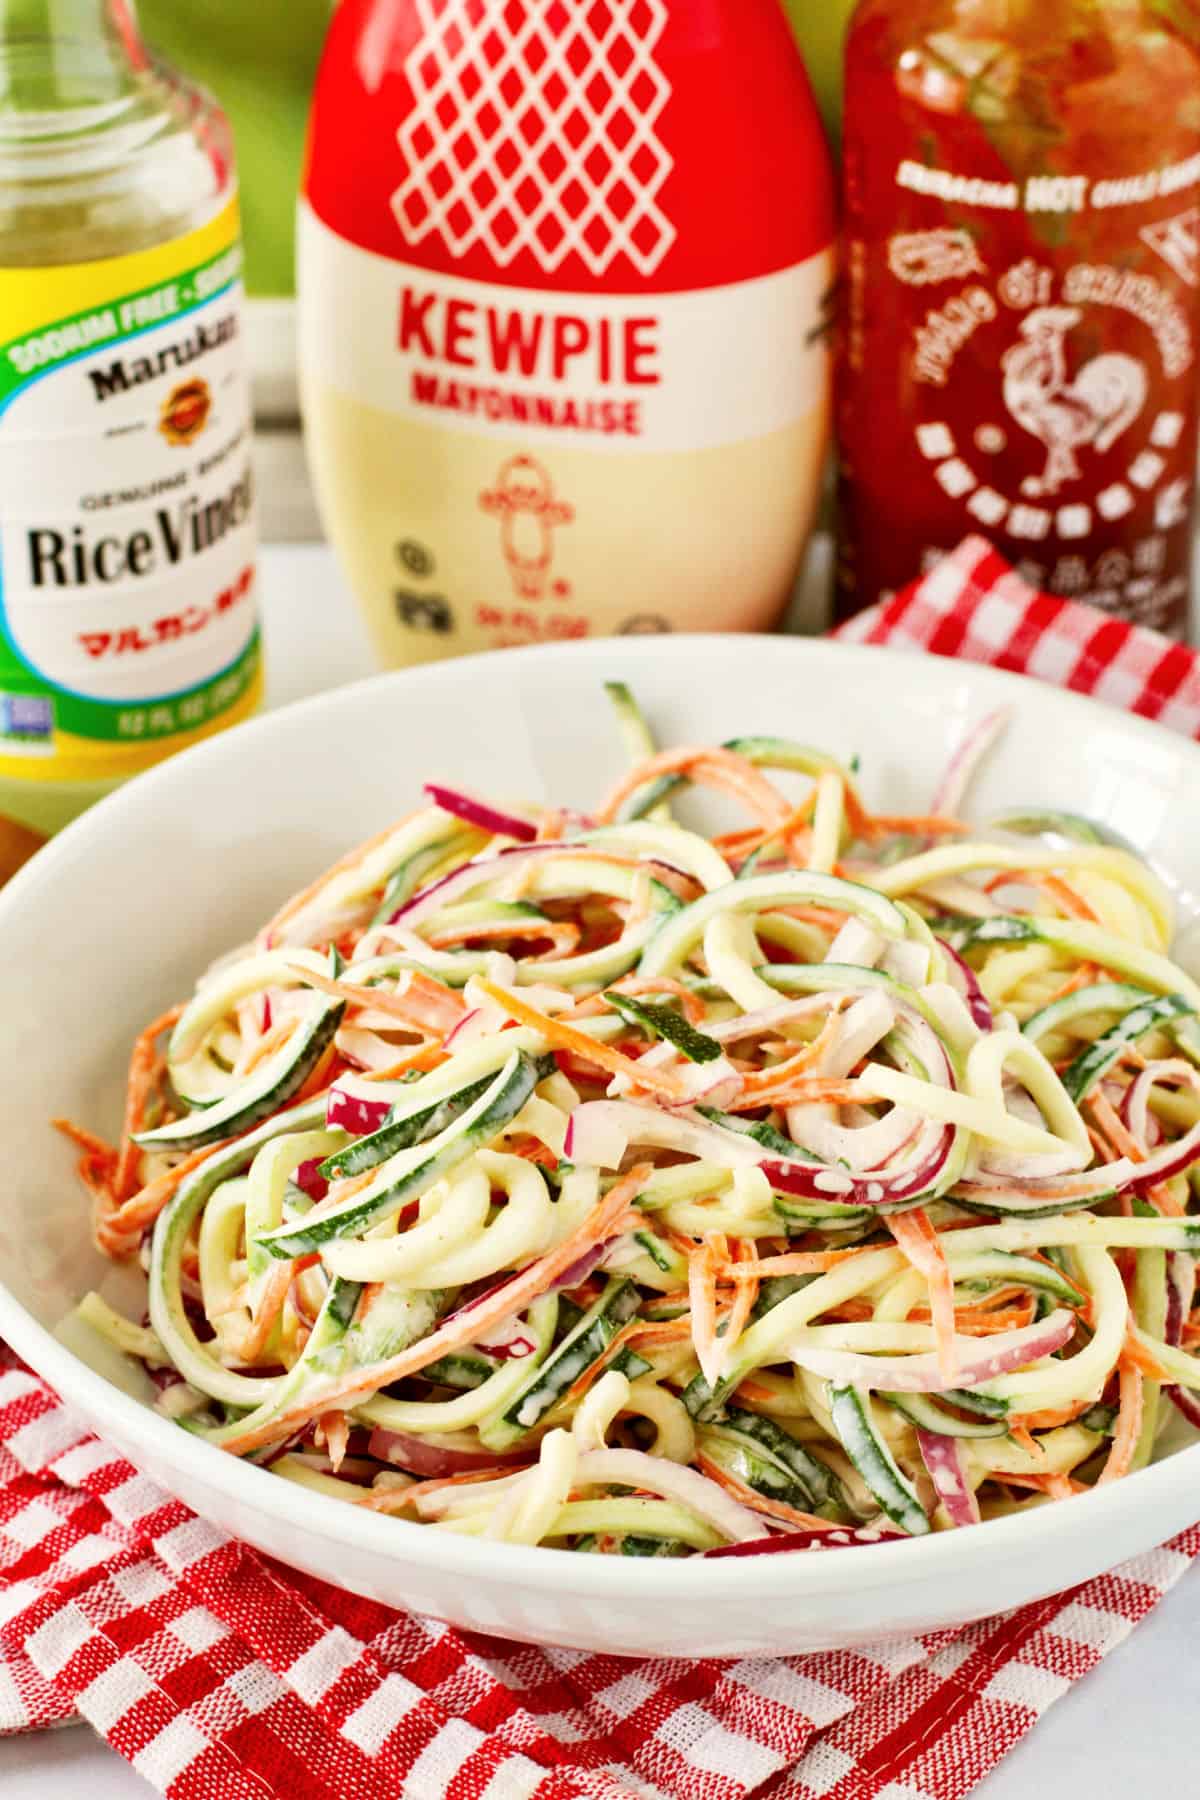 Zucchini Slaw with Kewpie mayonnaise bottle in the background.